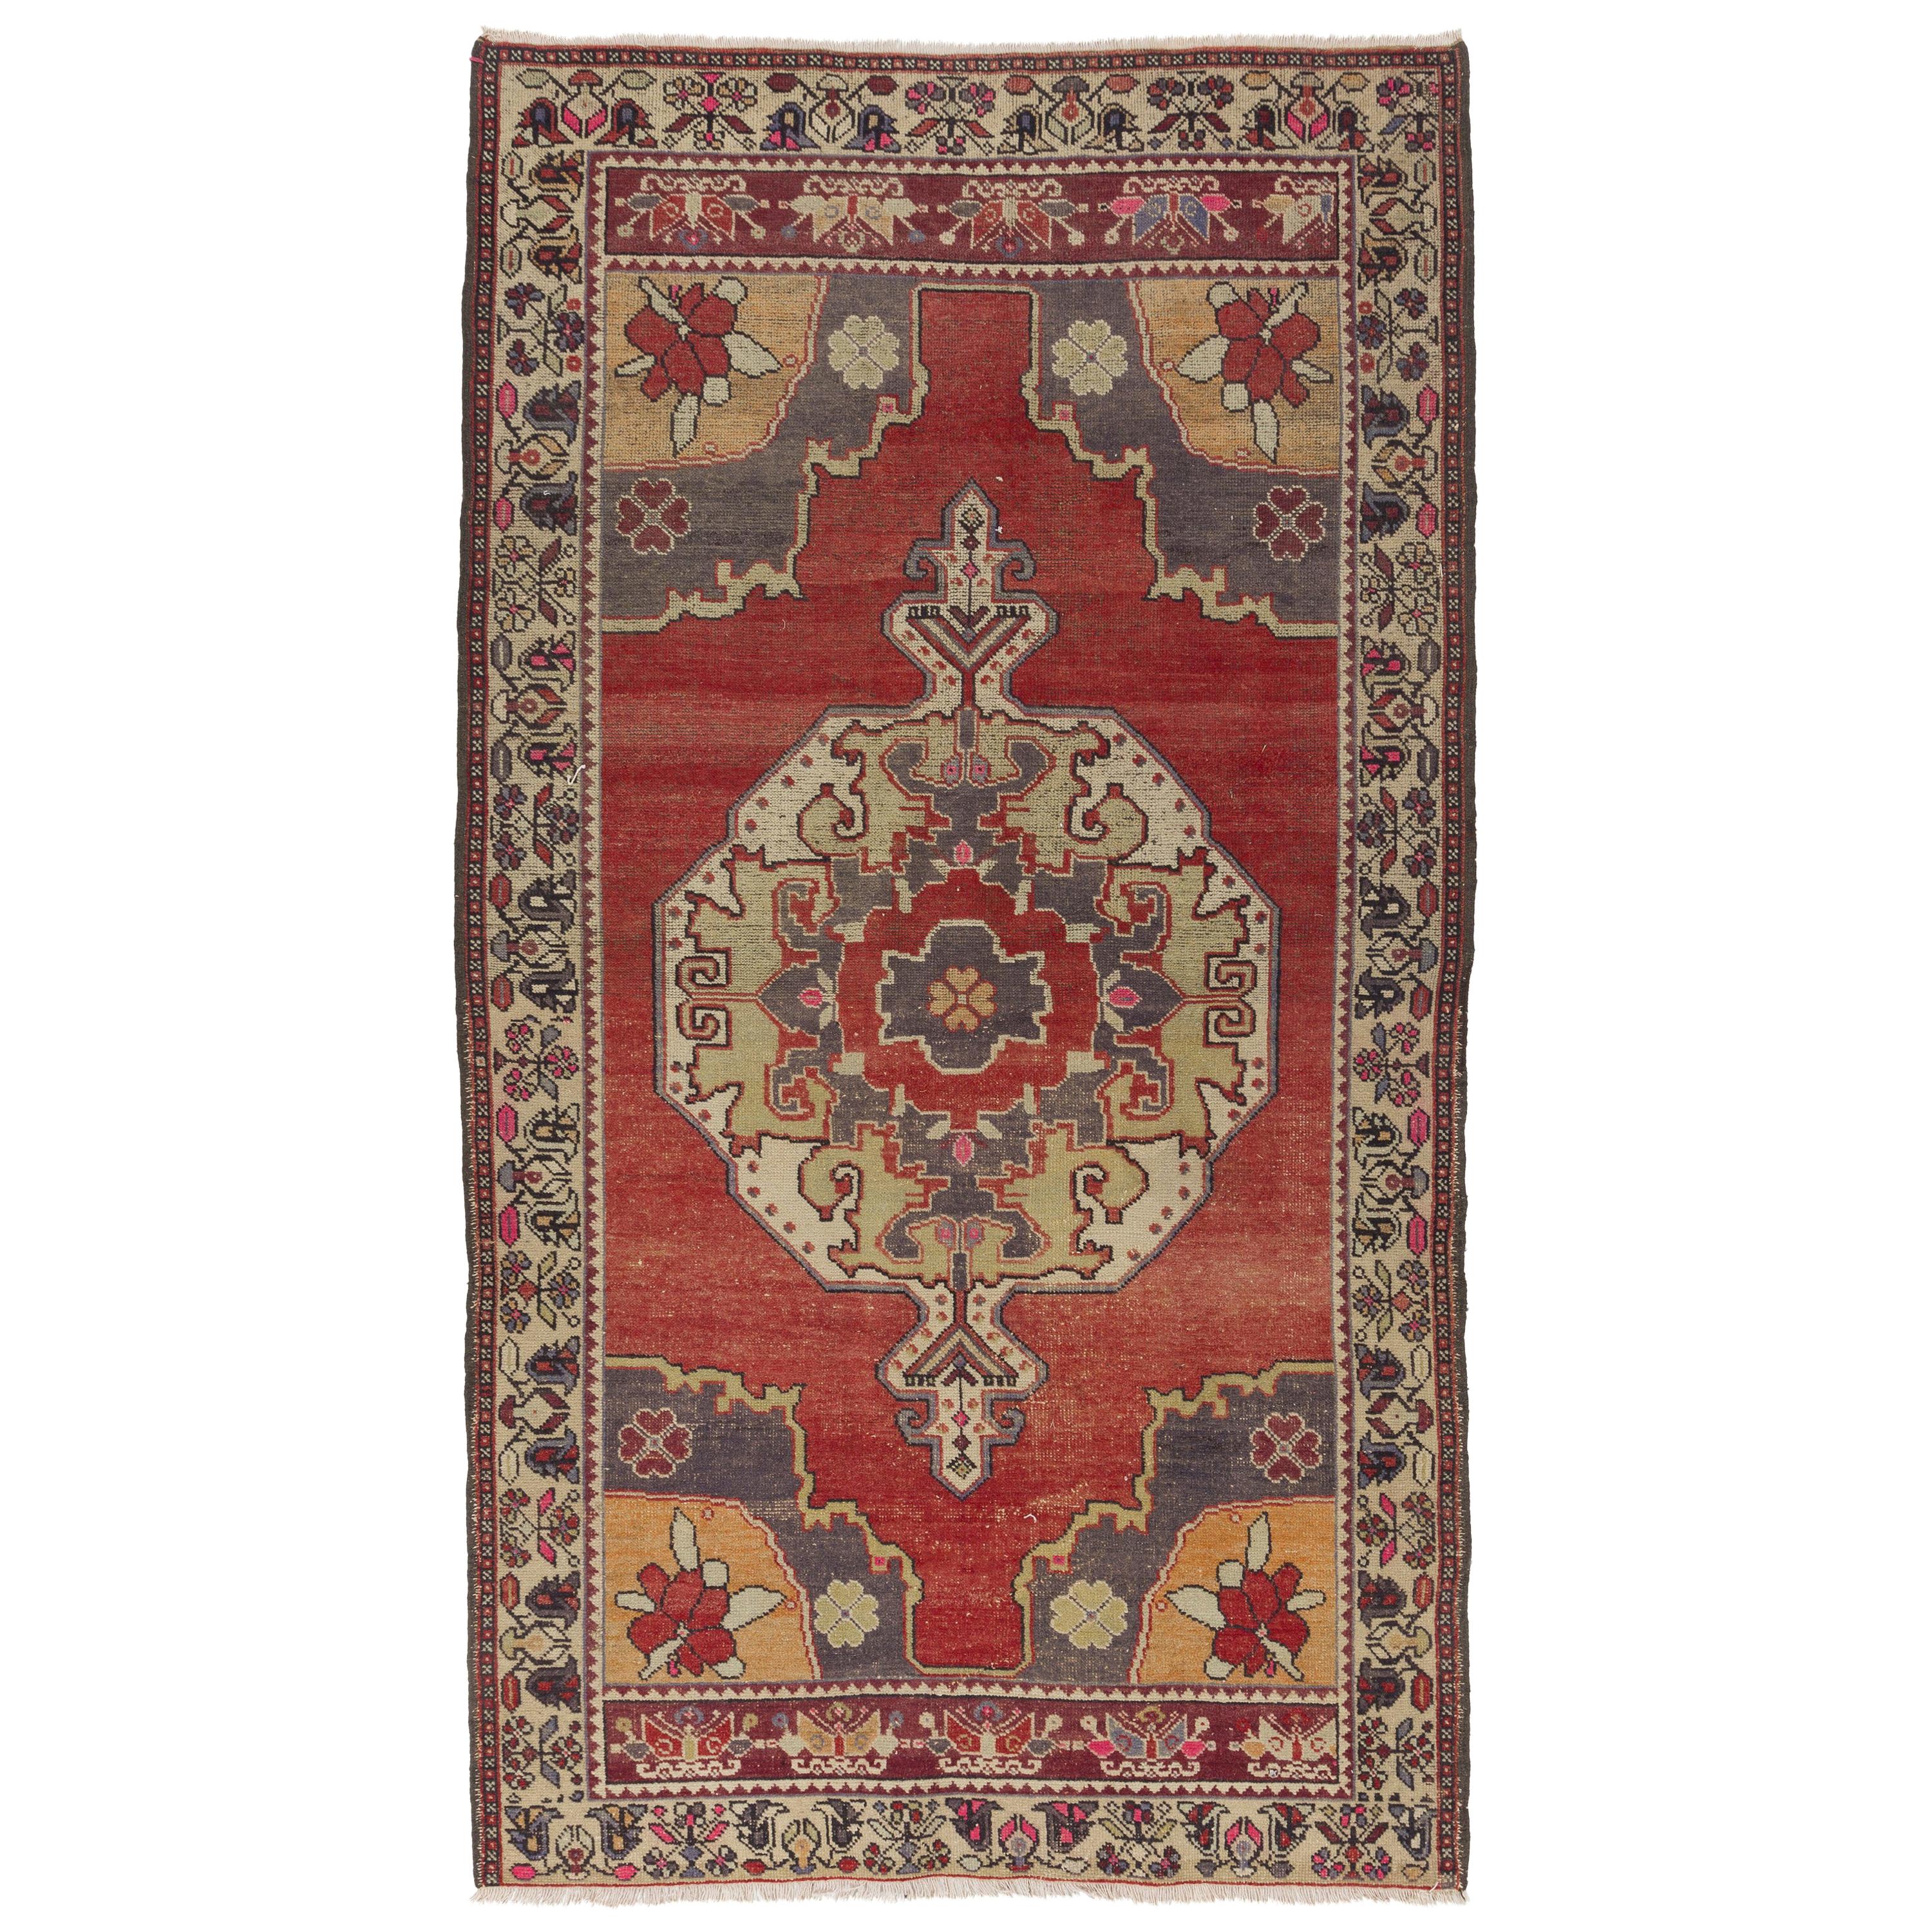 5x5.6 Ft Traditional Vintage Cappadocia Wool Rug. One-of-a-Kind Handmade Carpet For Sale